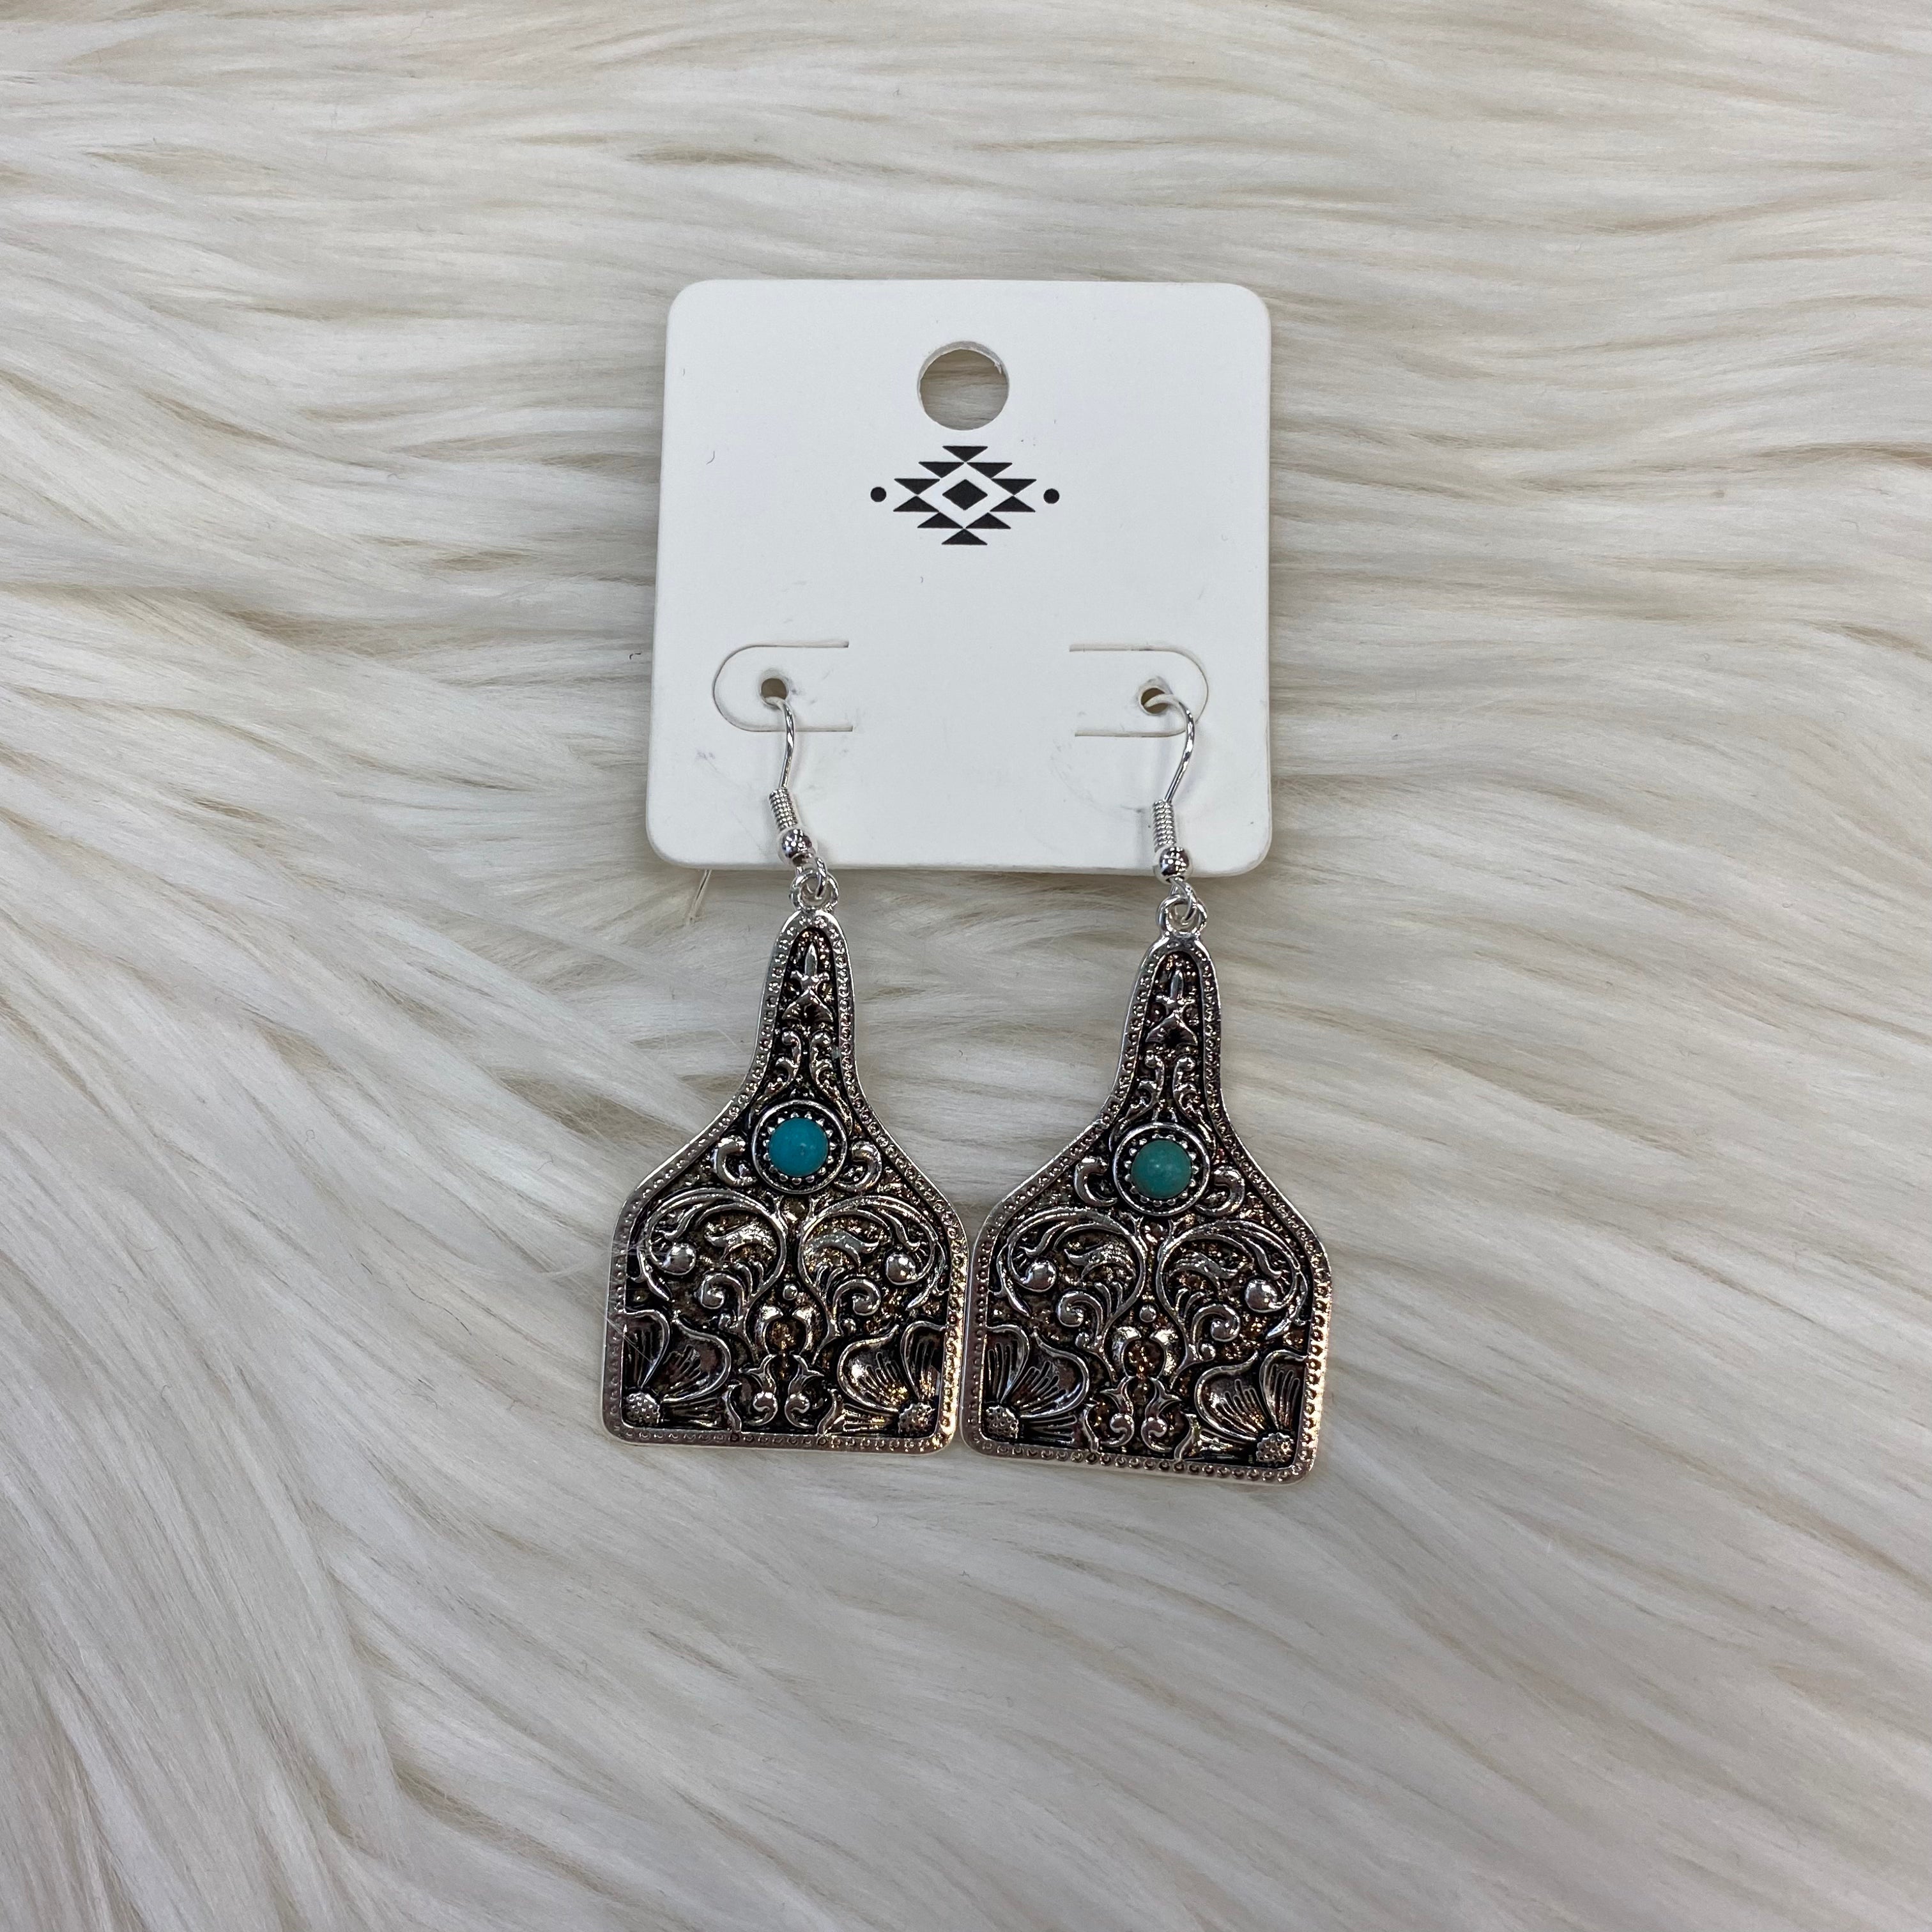 Patterned Casting Dangle Earrings in Turquoise